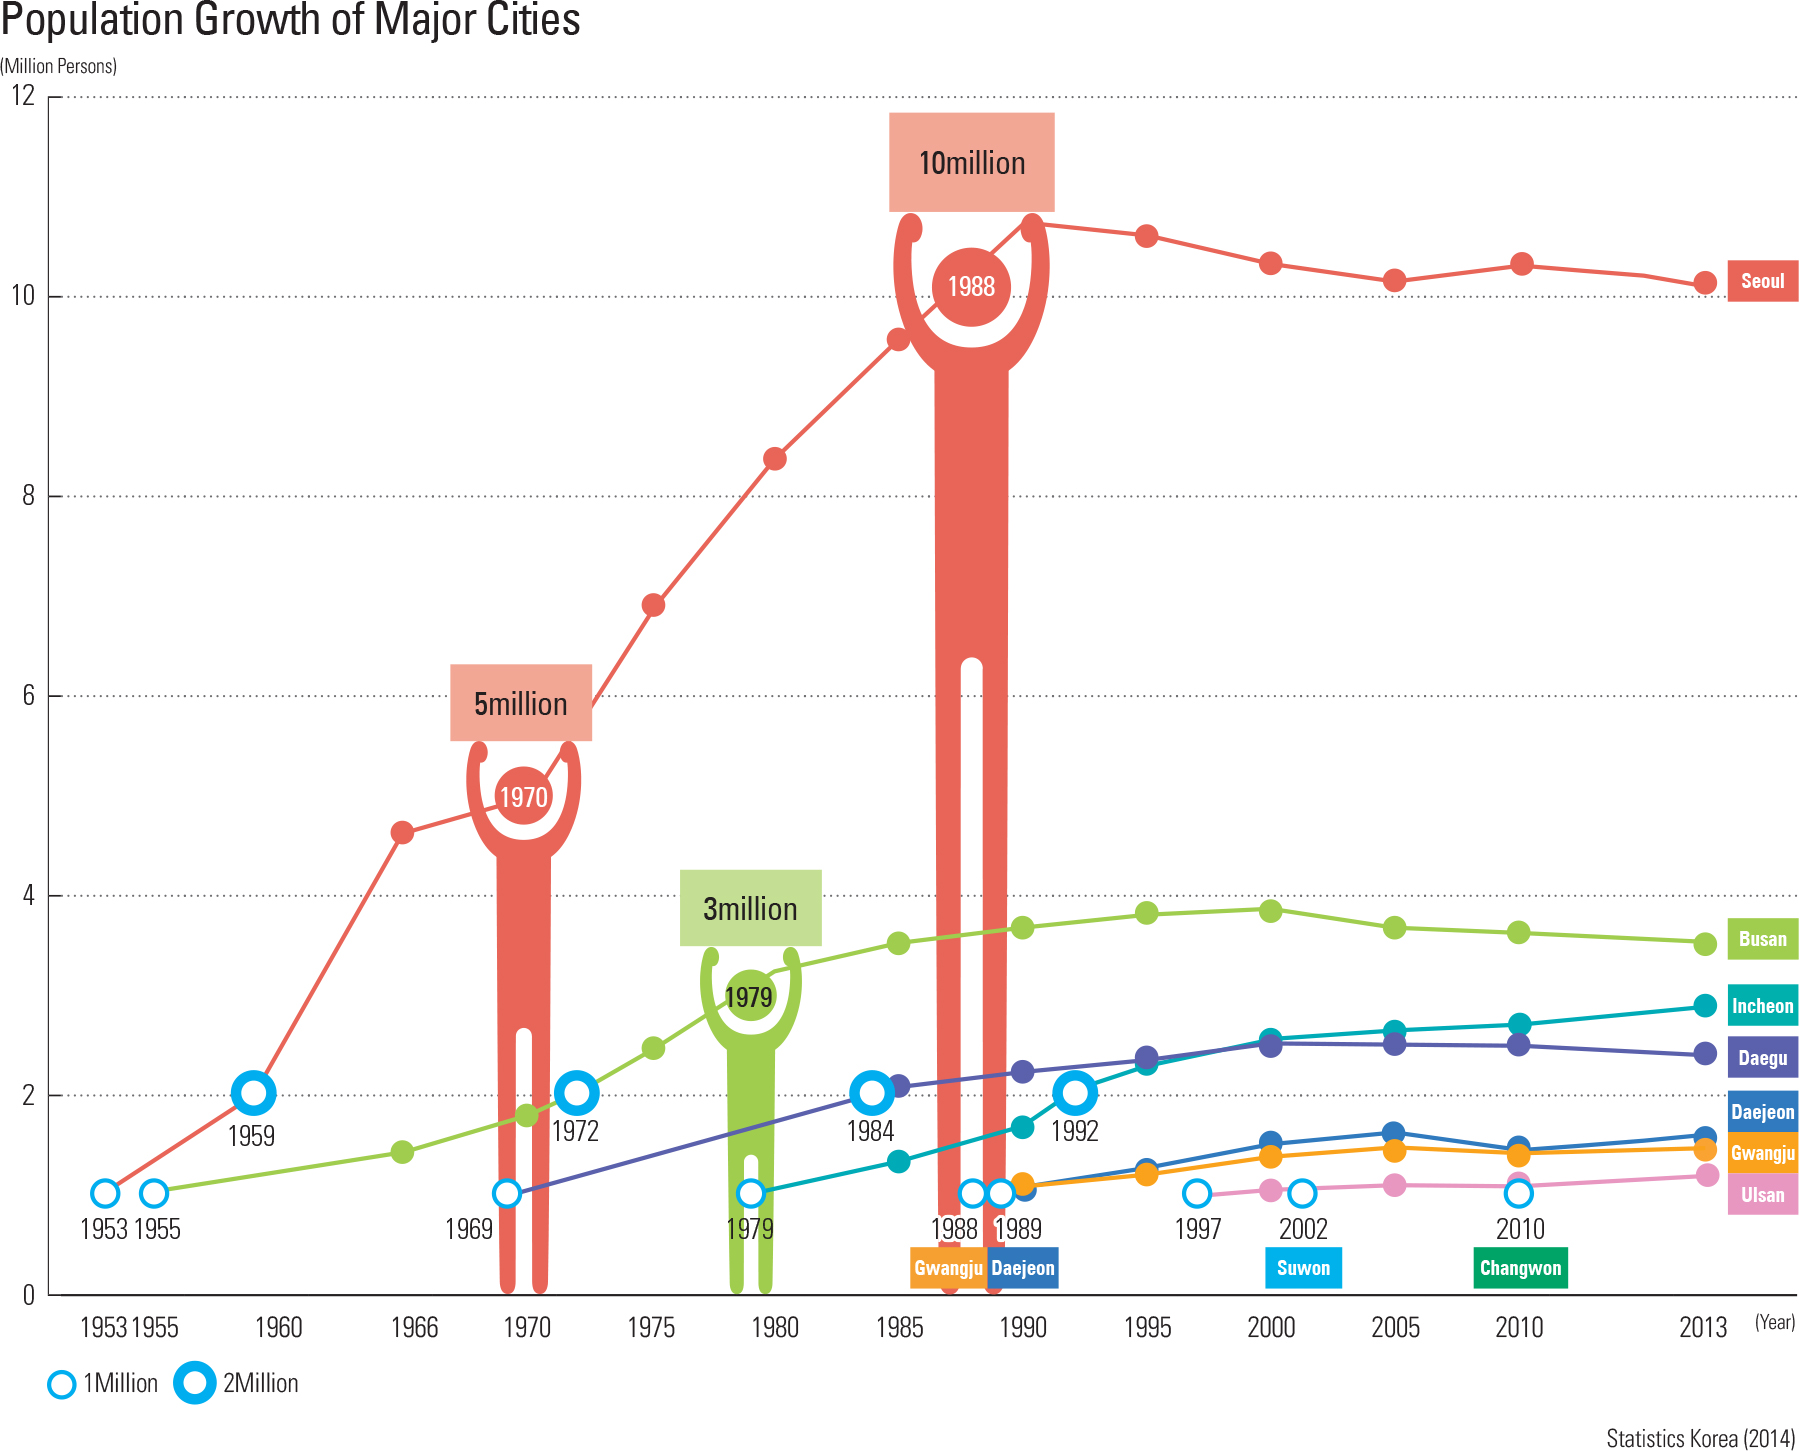 Population Growth of Major Cities<p class="oz_zoom" zimg="http://imagedata.cafe24.com/us_1/us1_72-4_2.jpg"><span style="font-family:Nanum Myeongjo;"><span style="font-size:18px;"><span class="label label-danger">UPDATE DATA</span></span></p>